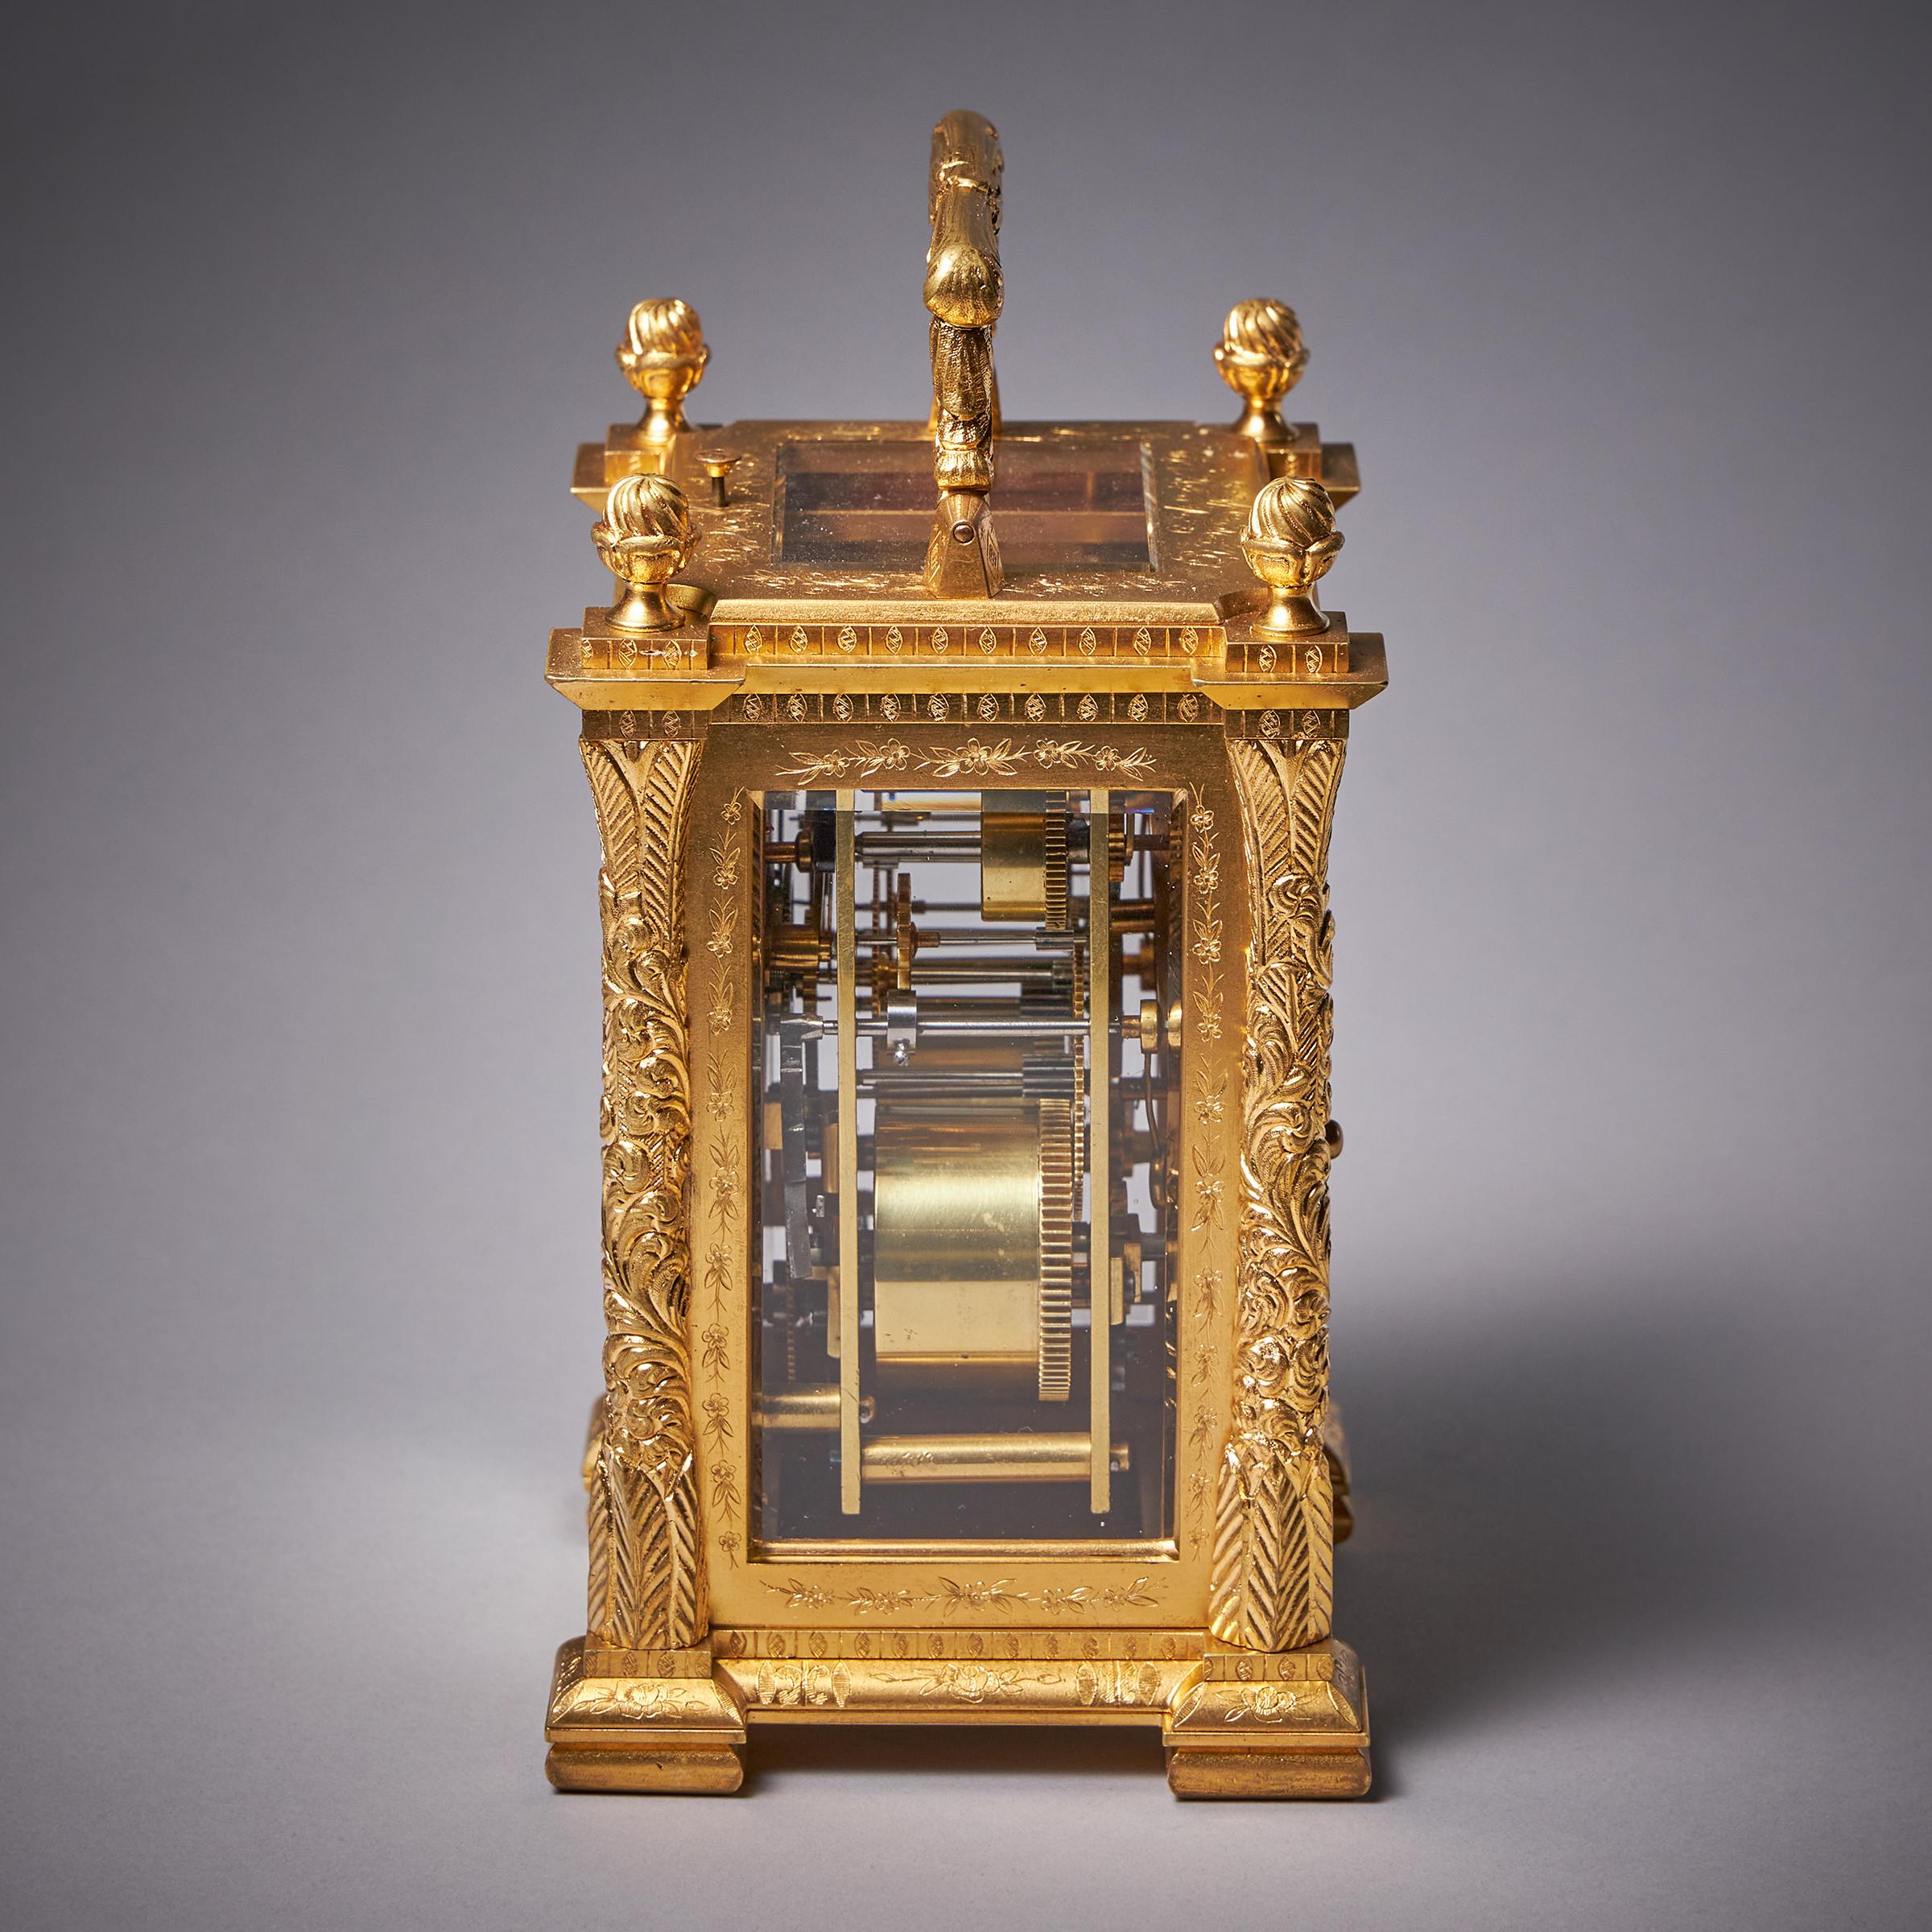 French 19th Century Eight Day Gilt Brass Carriage Clock with Alarm by Orange, Paris